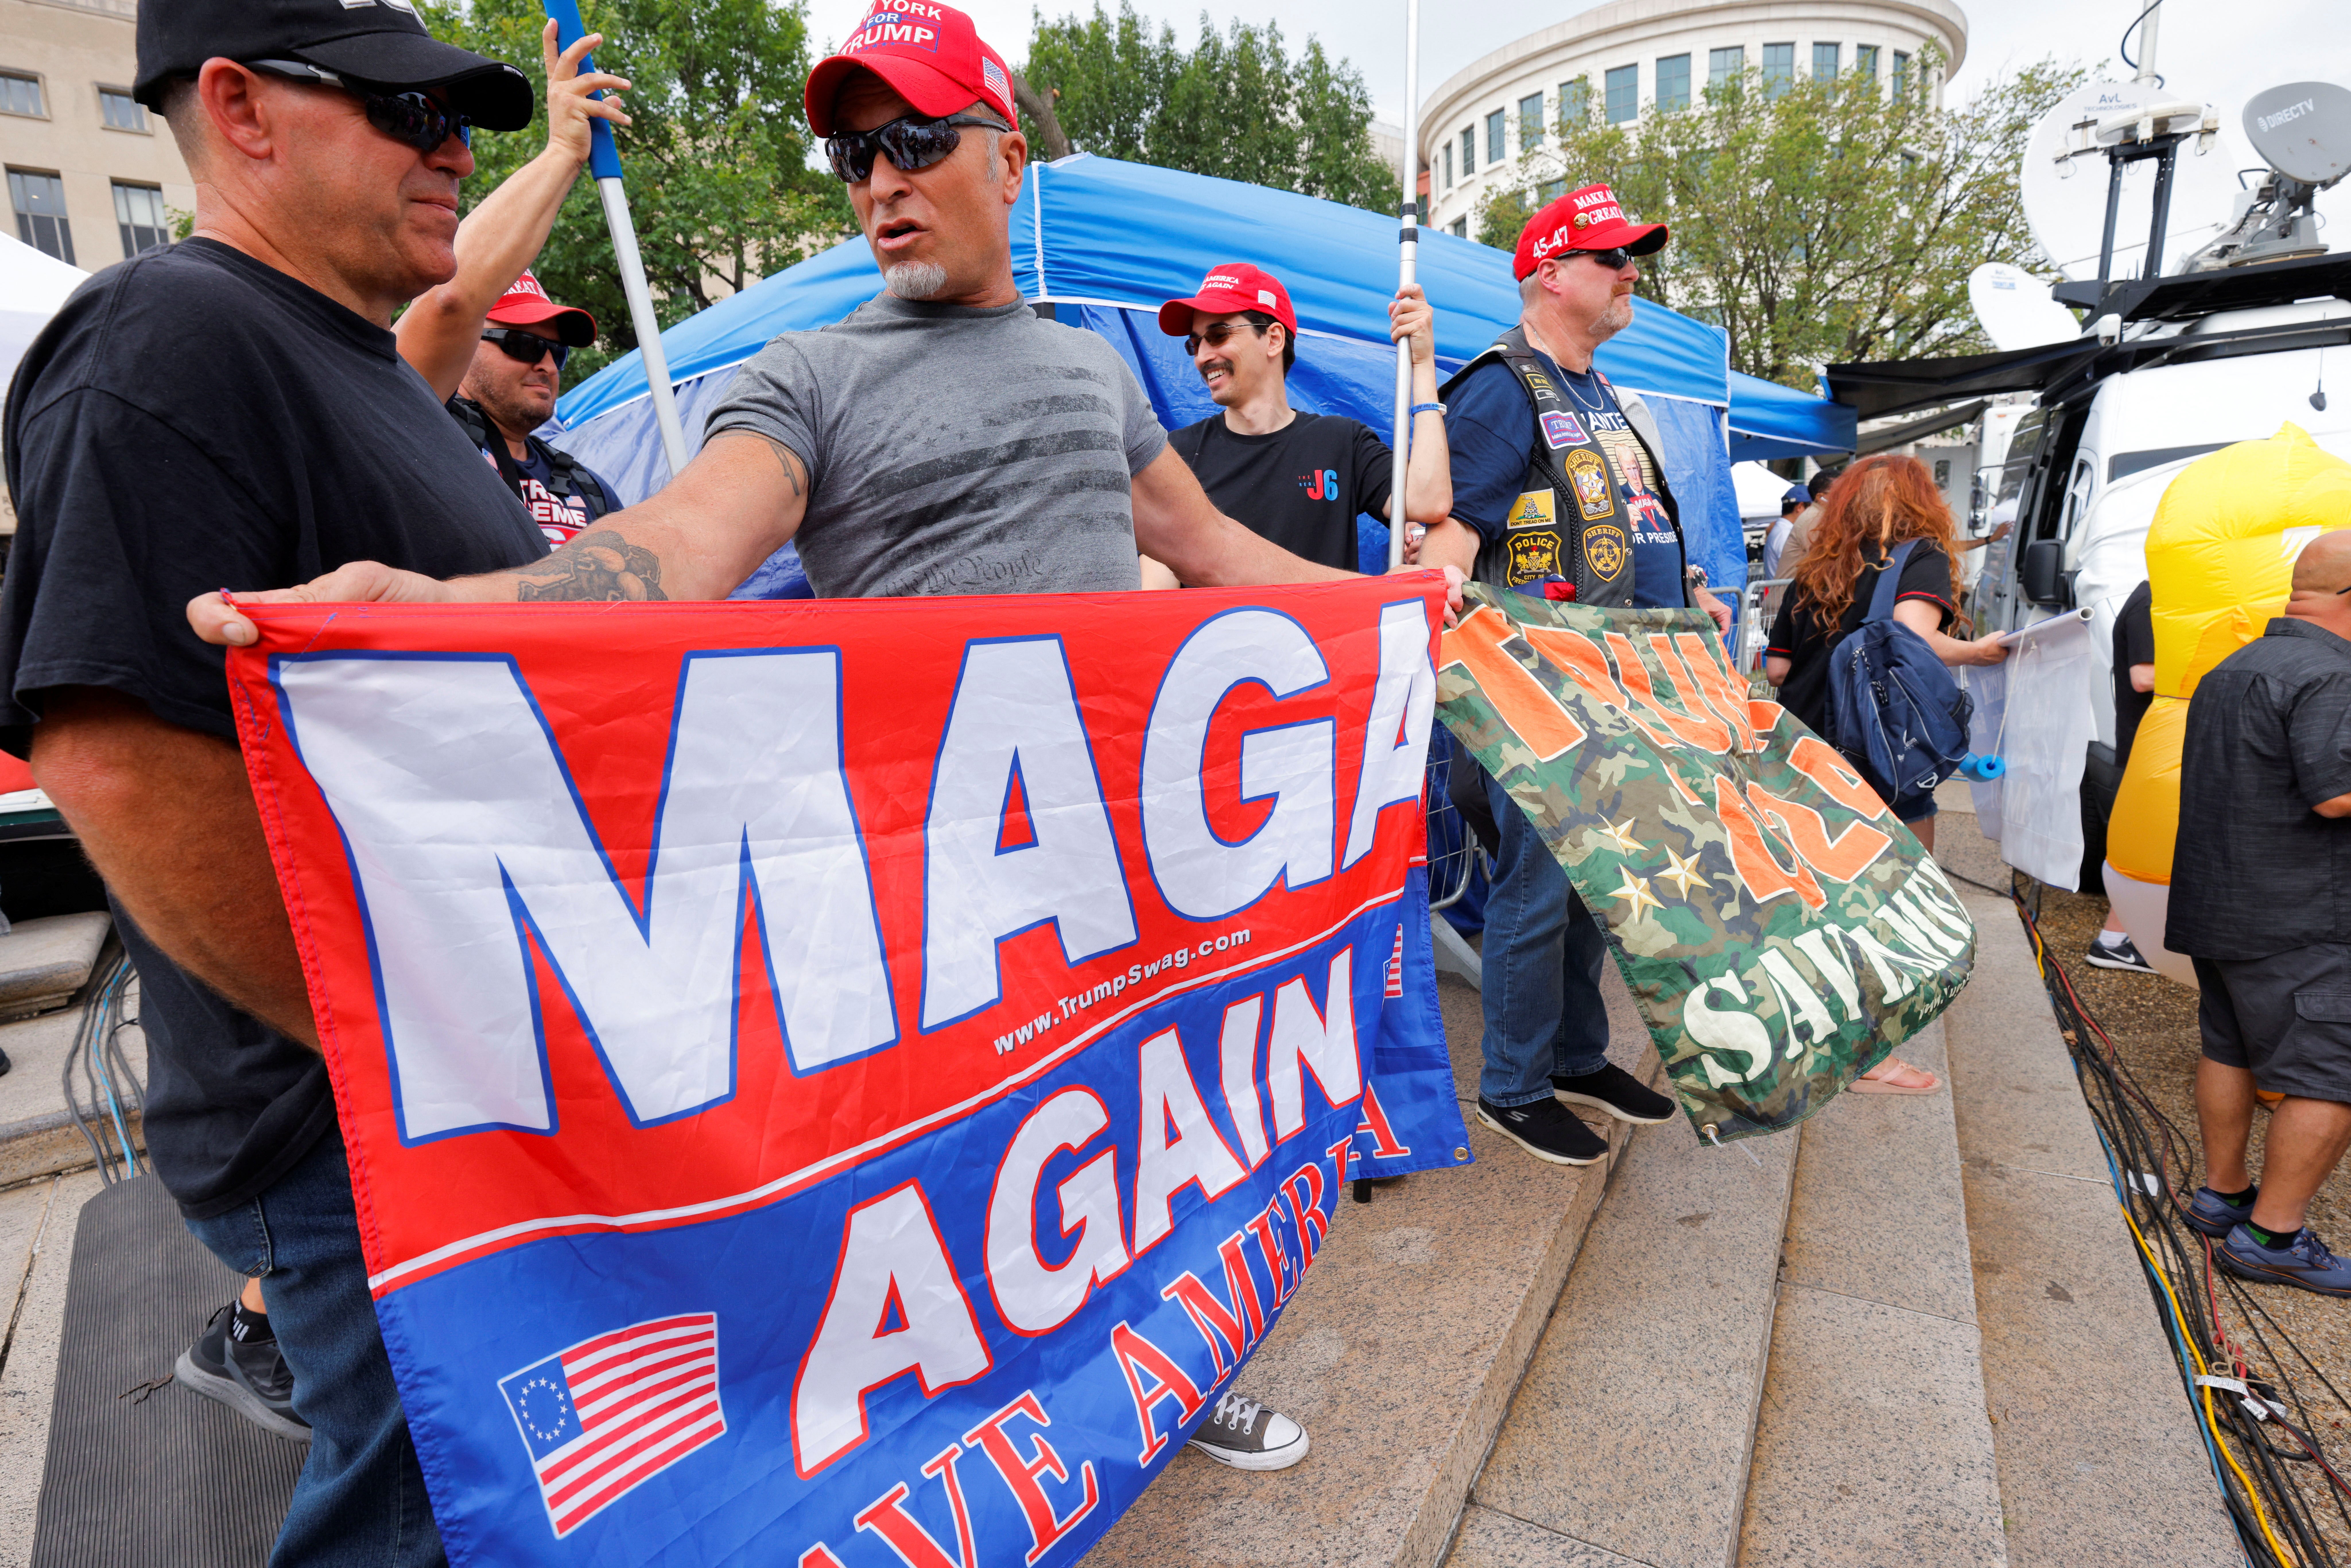 Trump supporters demonstrated outside a federal courthouse on 3 August before the former president’s arraignment on charges connected to his attempts to overturn the results of the 2020 election.